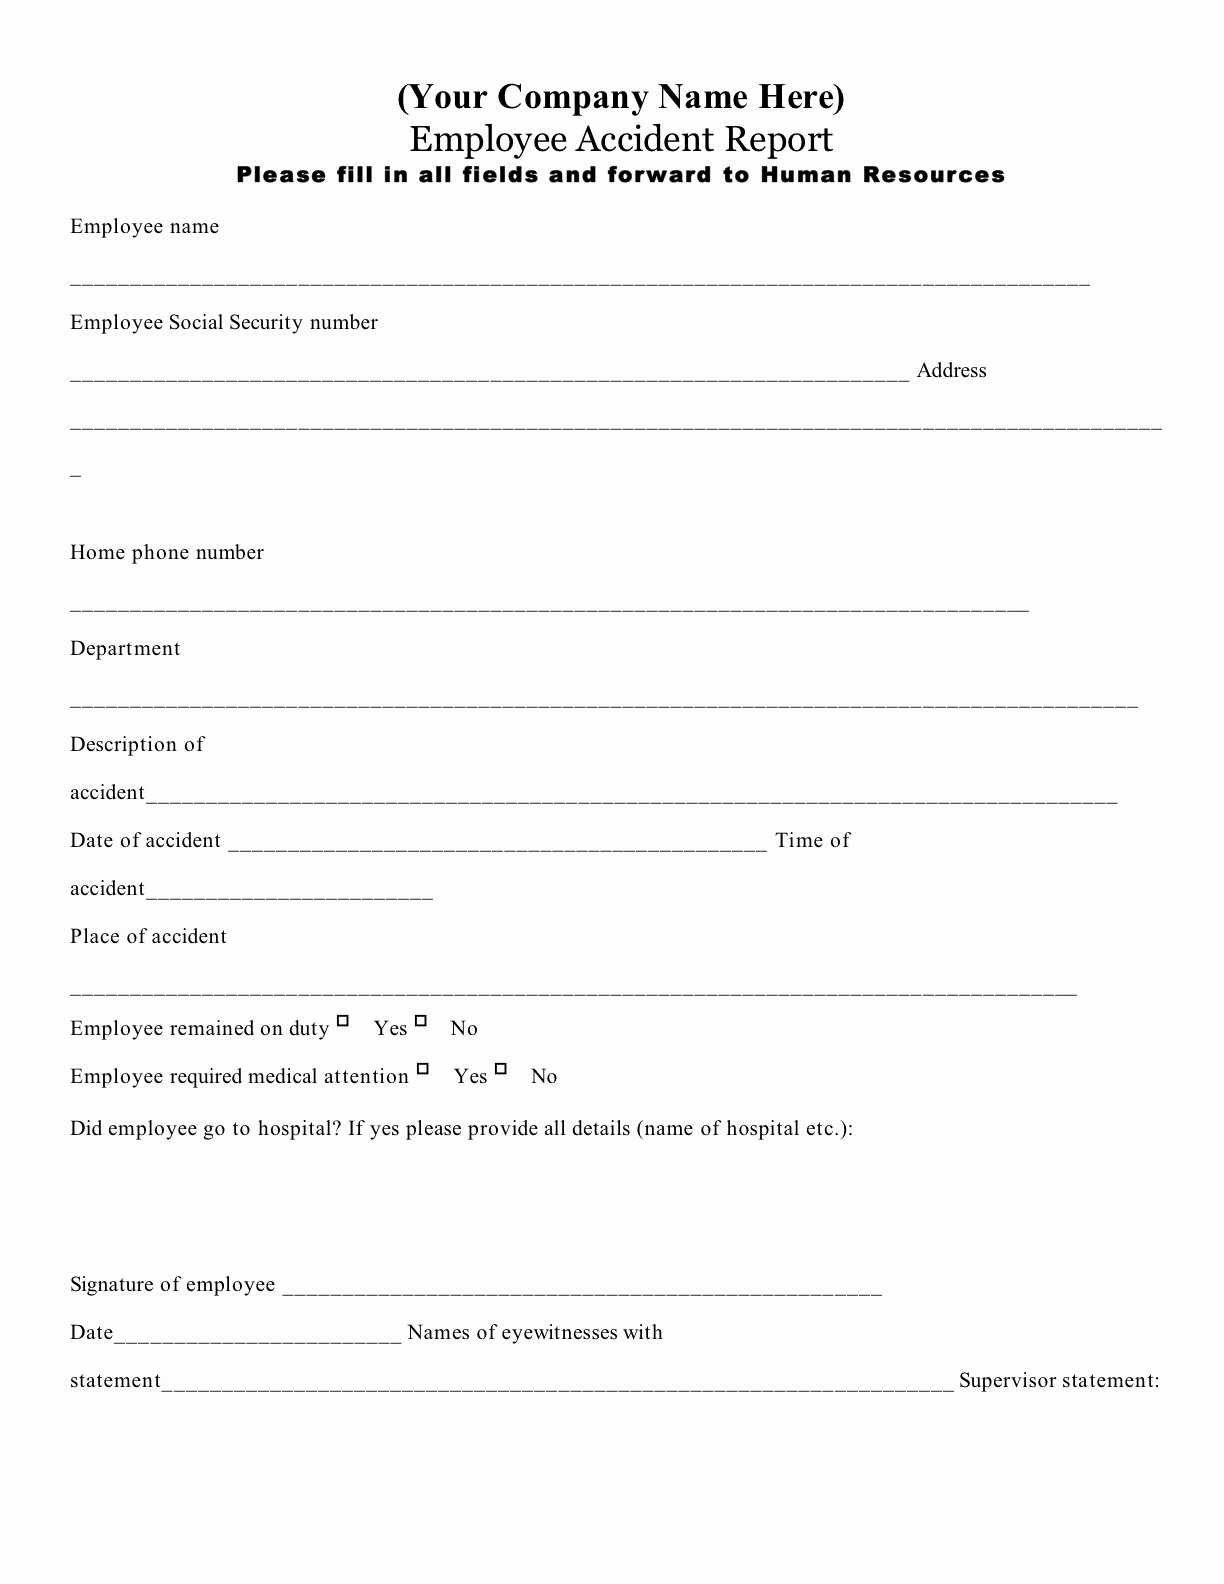 Workplace Accident Report form New Employee Accident Report forms